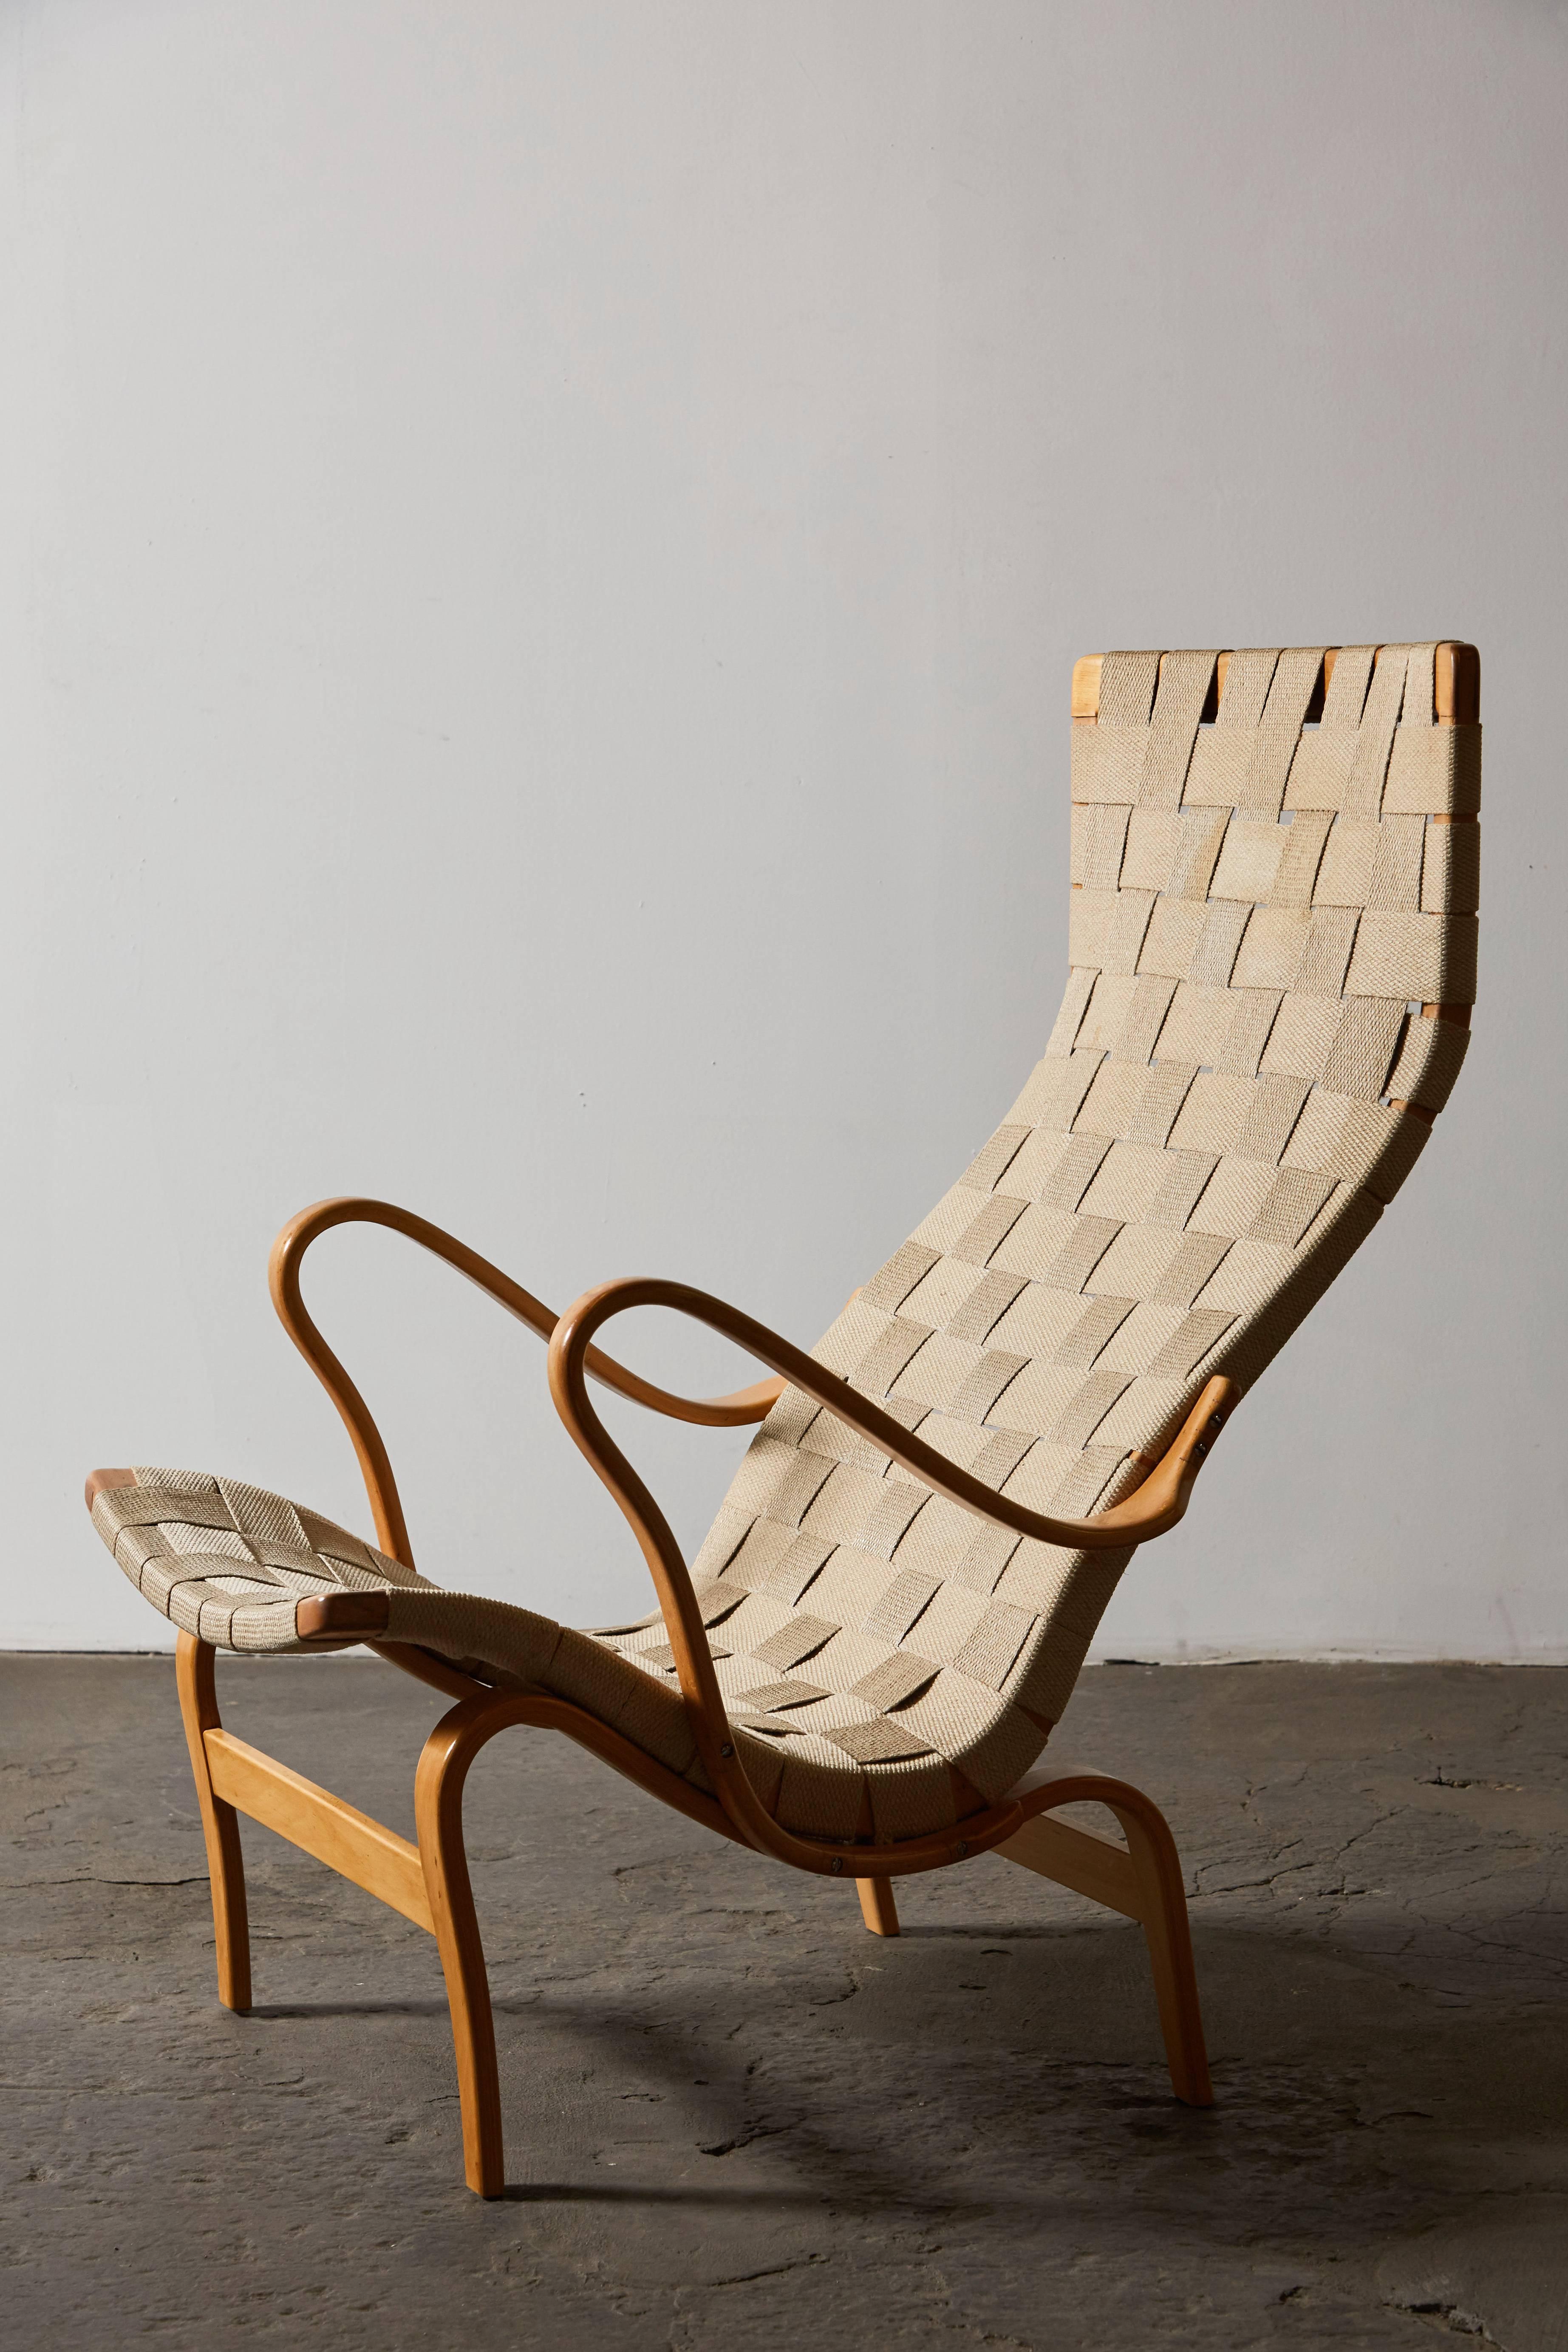 Pair of Pernilla lounge chairs by Bruno Mathsson. Made in Sweden, circa 1960s.